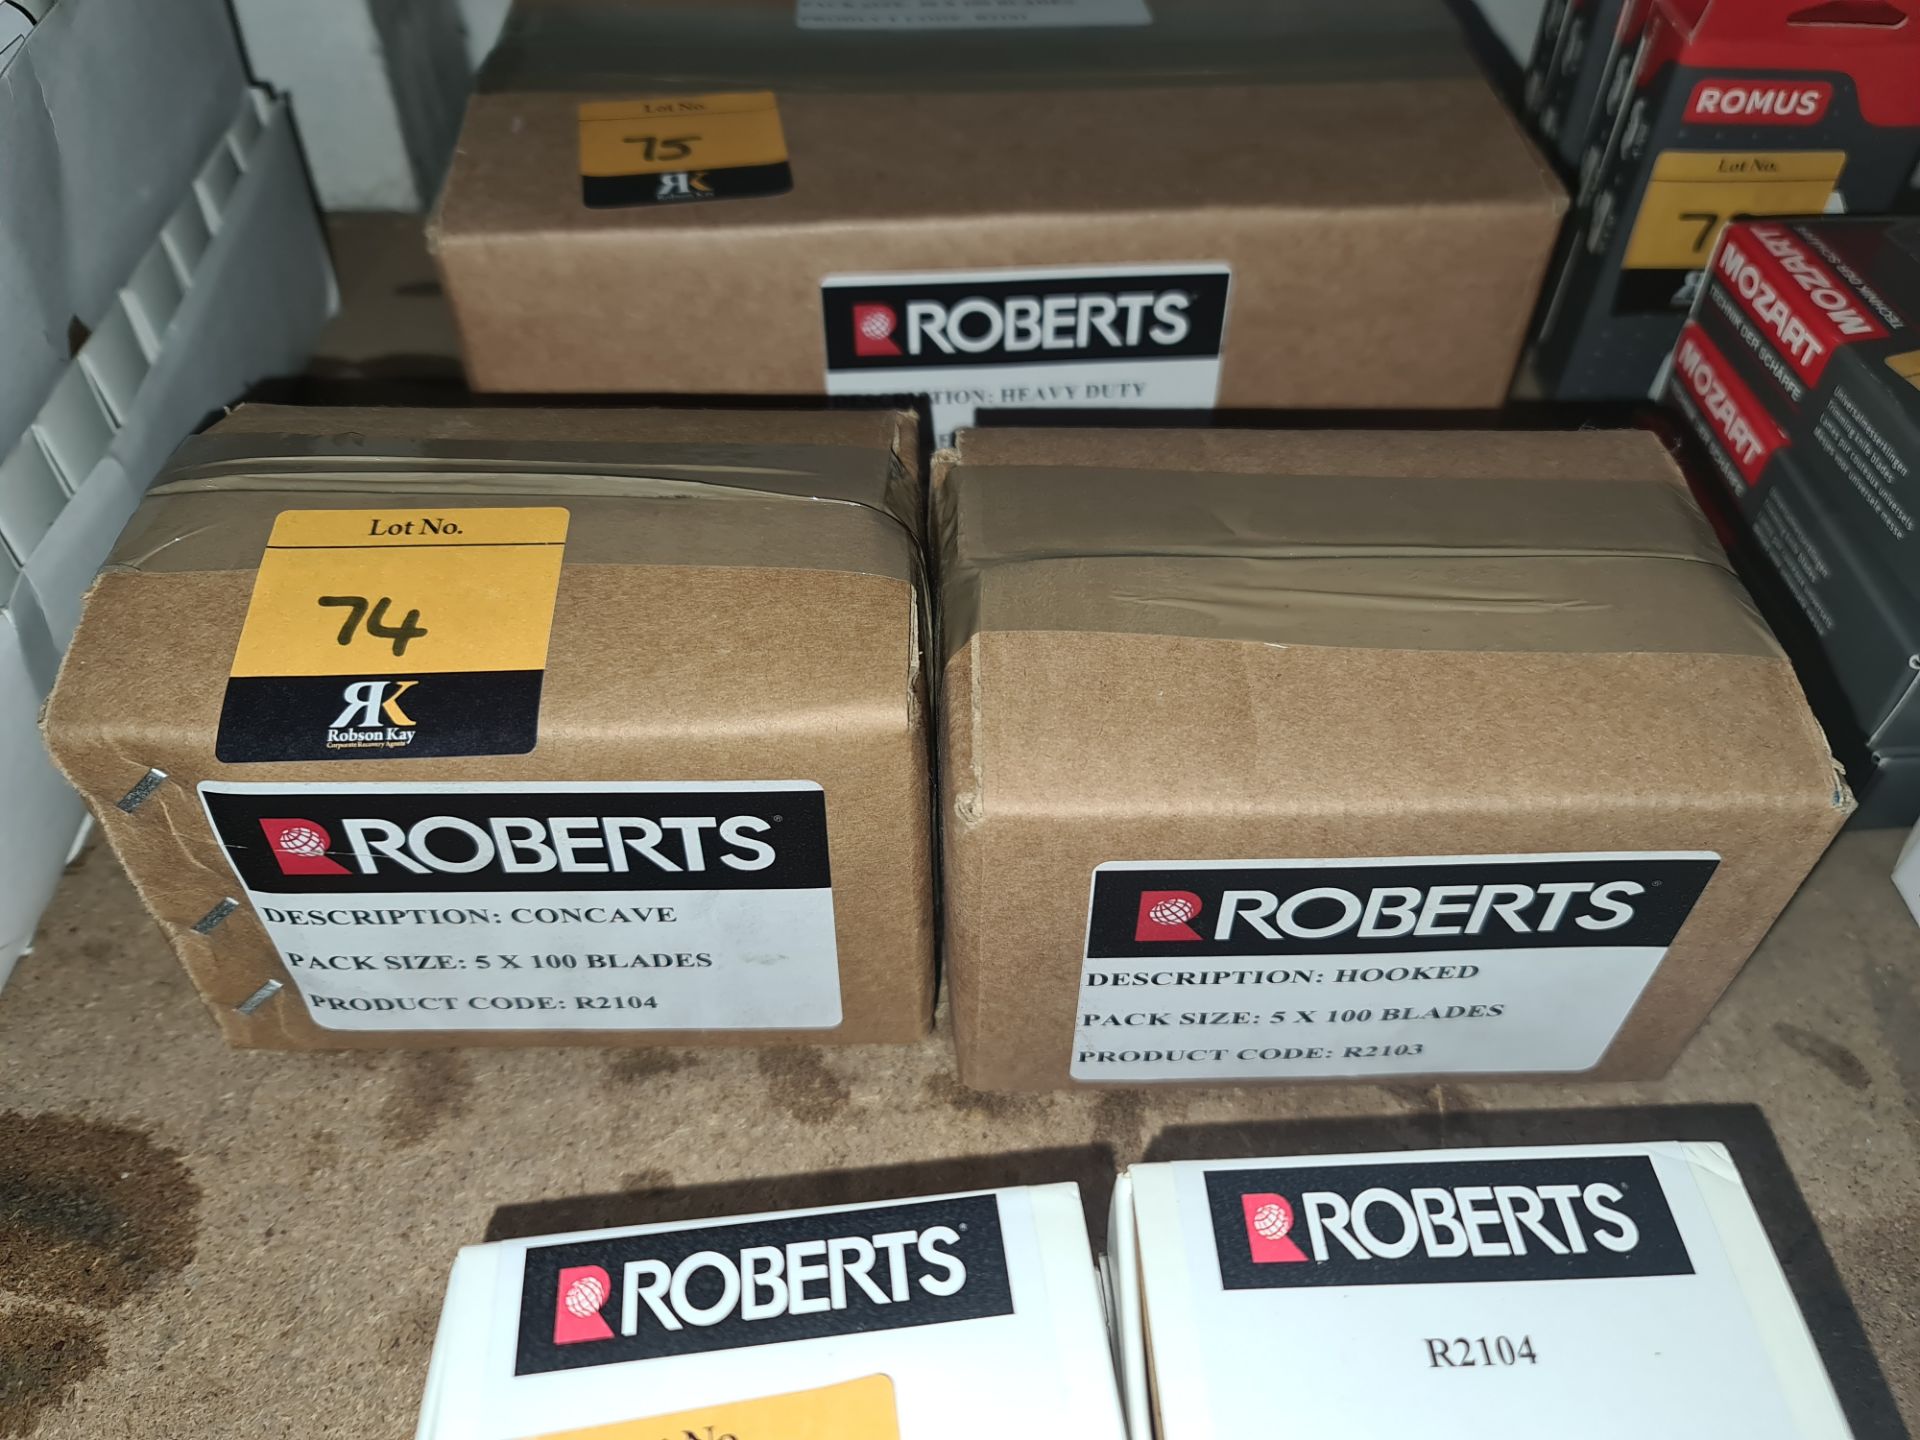 10 boxes of Roberts R2104 concave blades, product code R2104 - each box containing 100 bladesLots 31